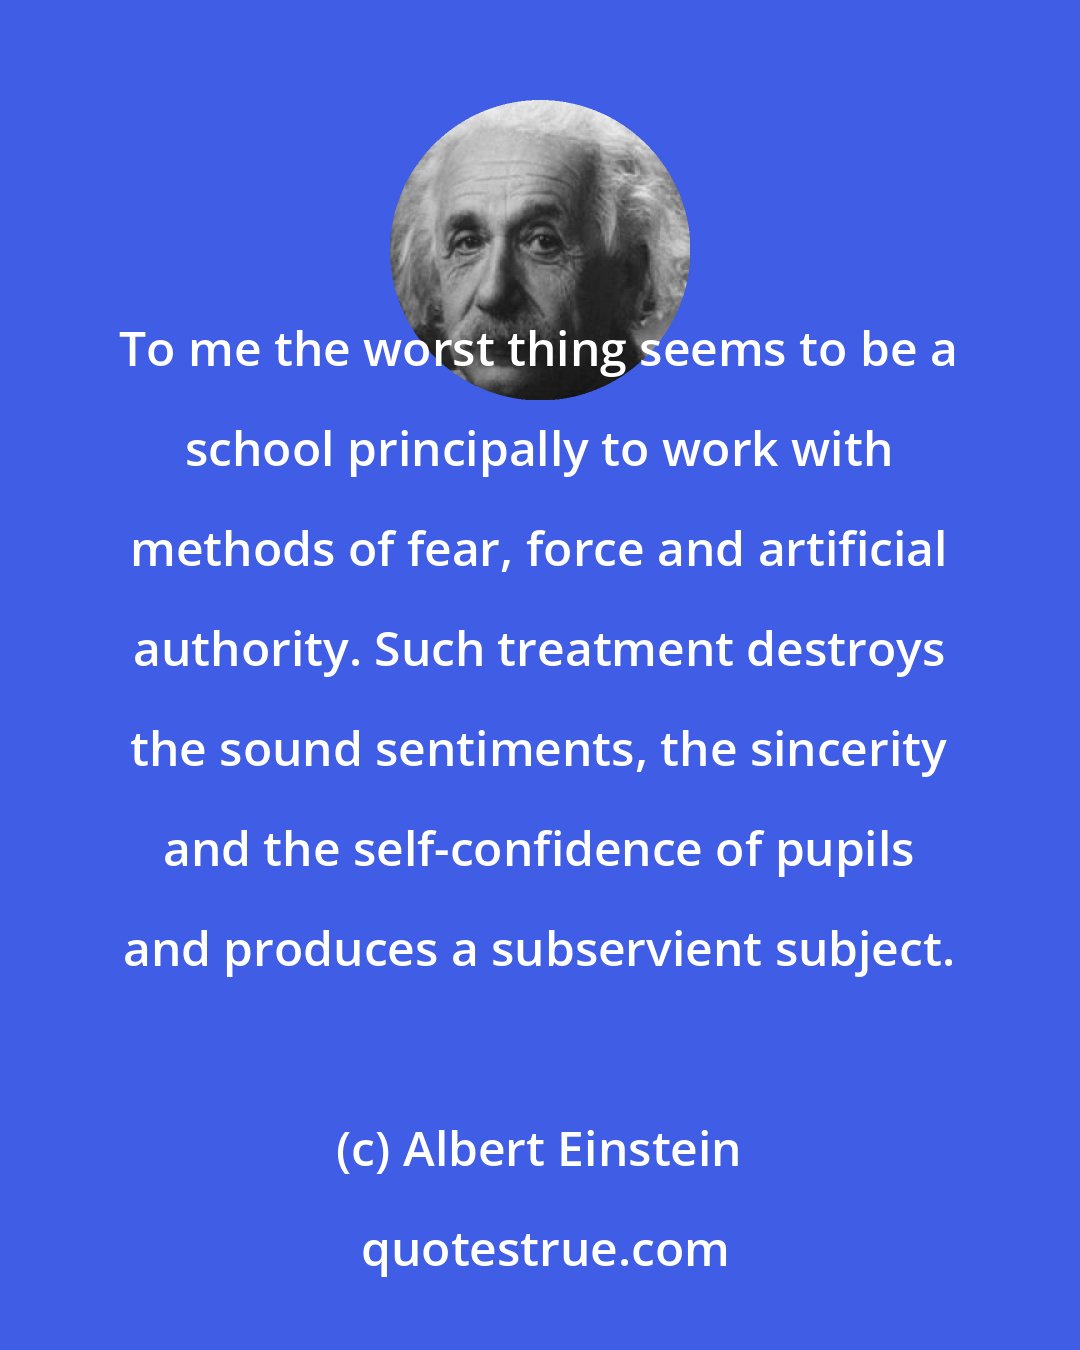 Albert Einstein: To me the worst thing seems to be a school principally to work with methods of fear, force and artificial authority. Such treatment destroys the sound sentiments, the sincerity and the self-confidence of pupils and produces a subservient subject.